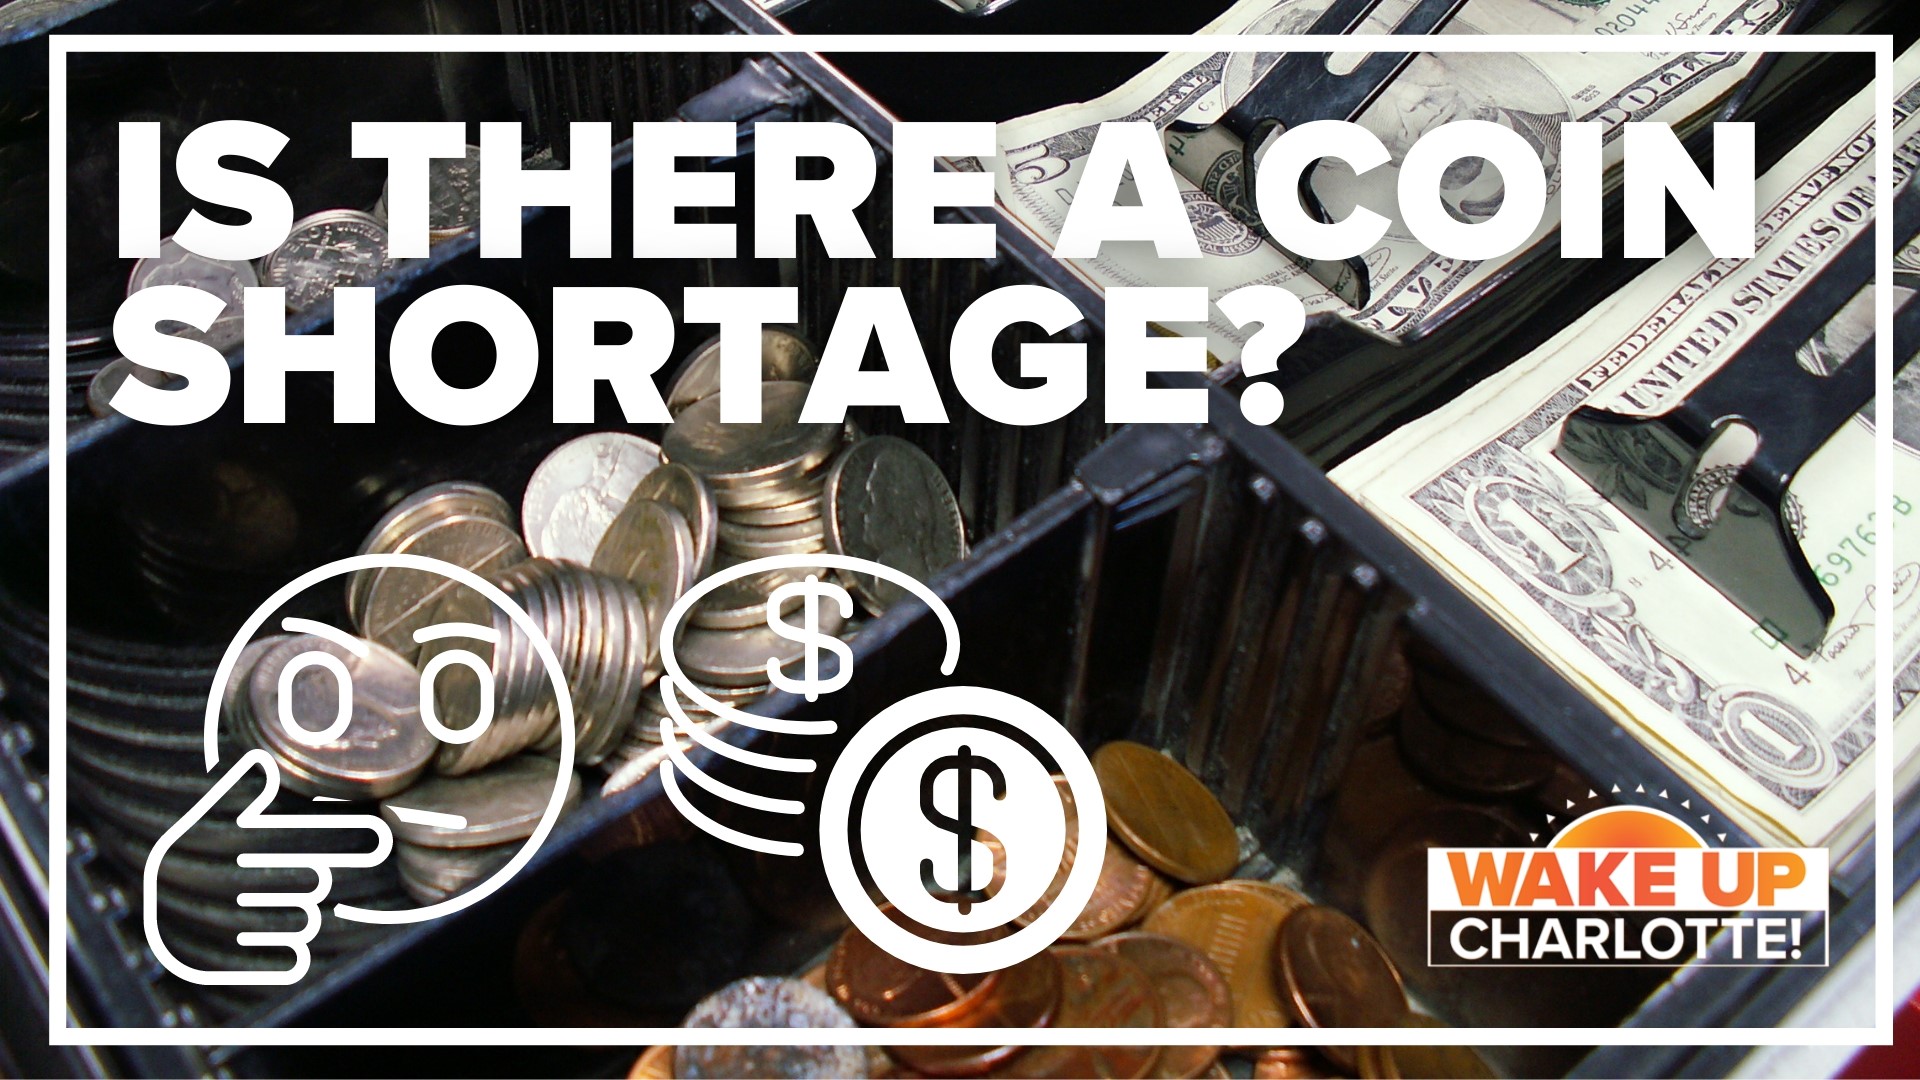 We have had a lot of calls into our newsroom asking if there is a coin shortage.